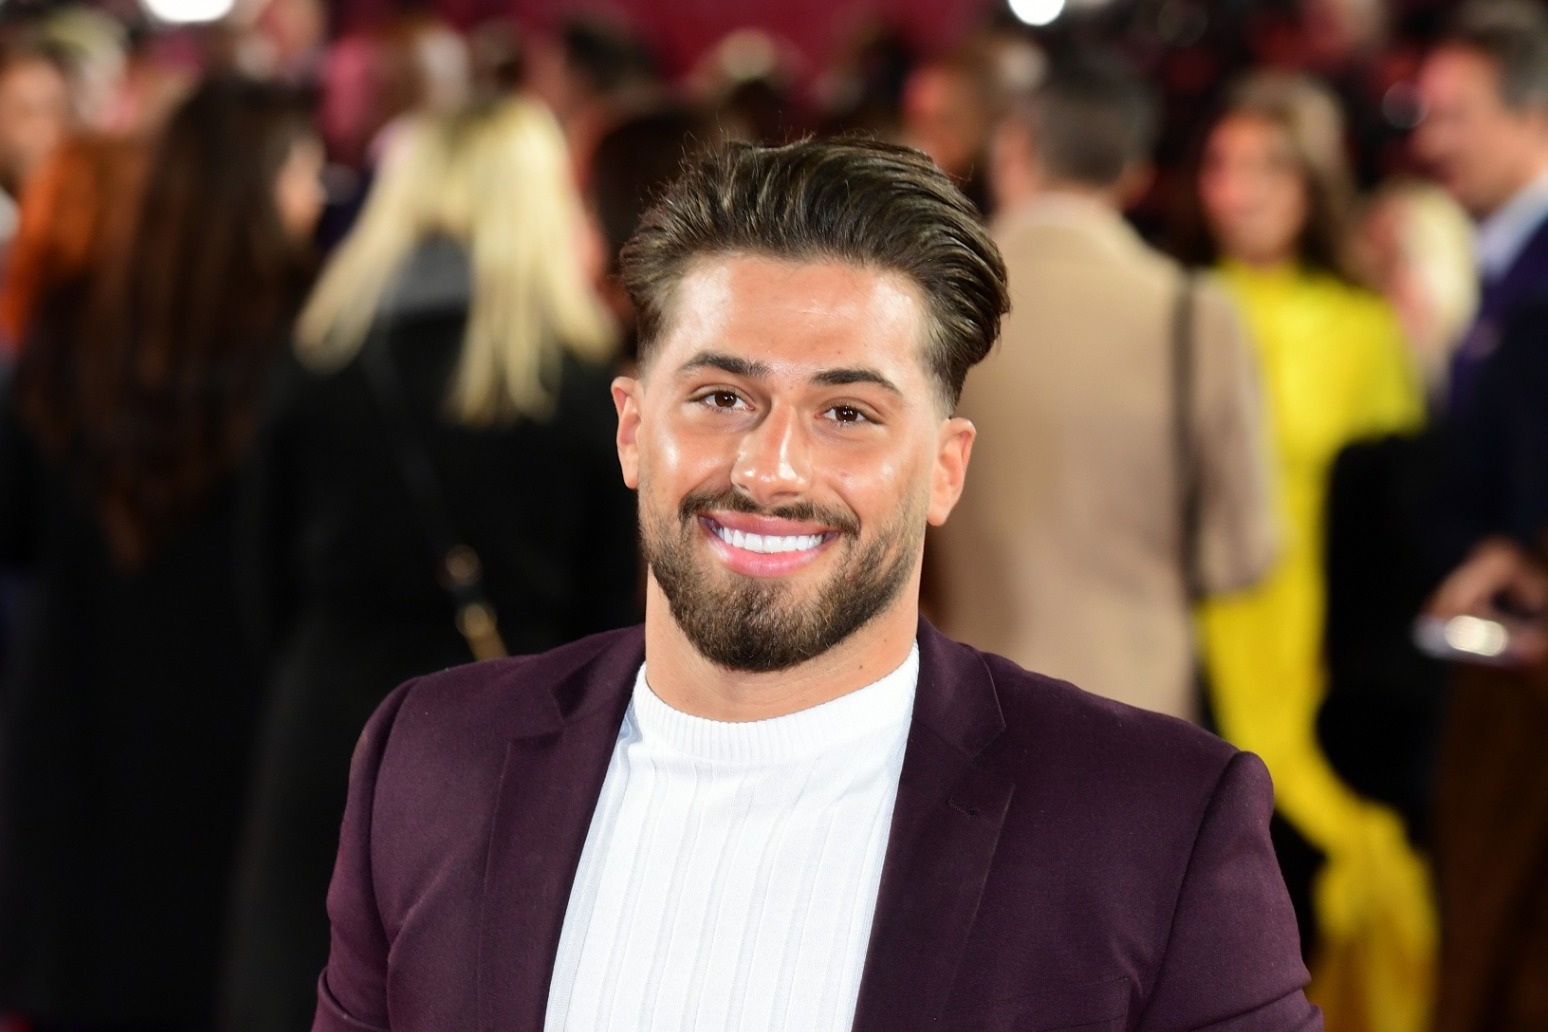 Biker died after ‘head-on collision’ with Love Island star’s car, inquest told 